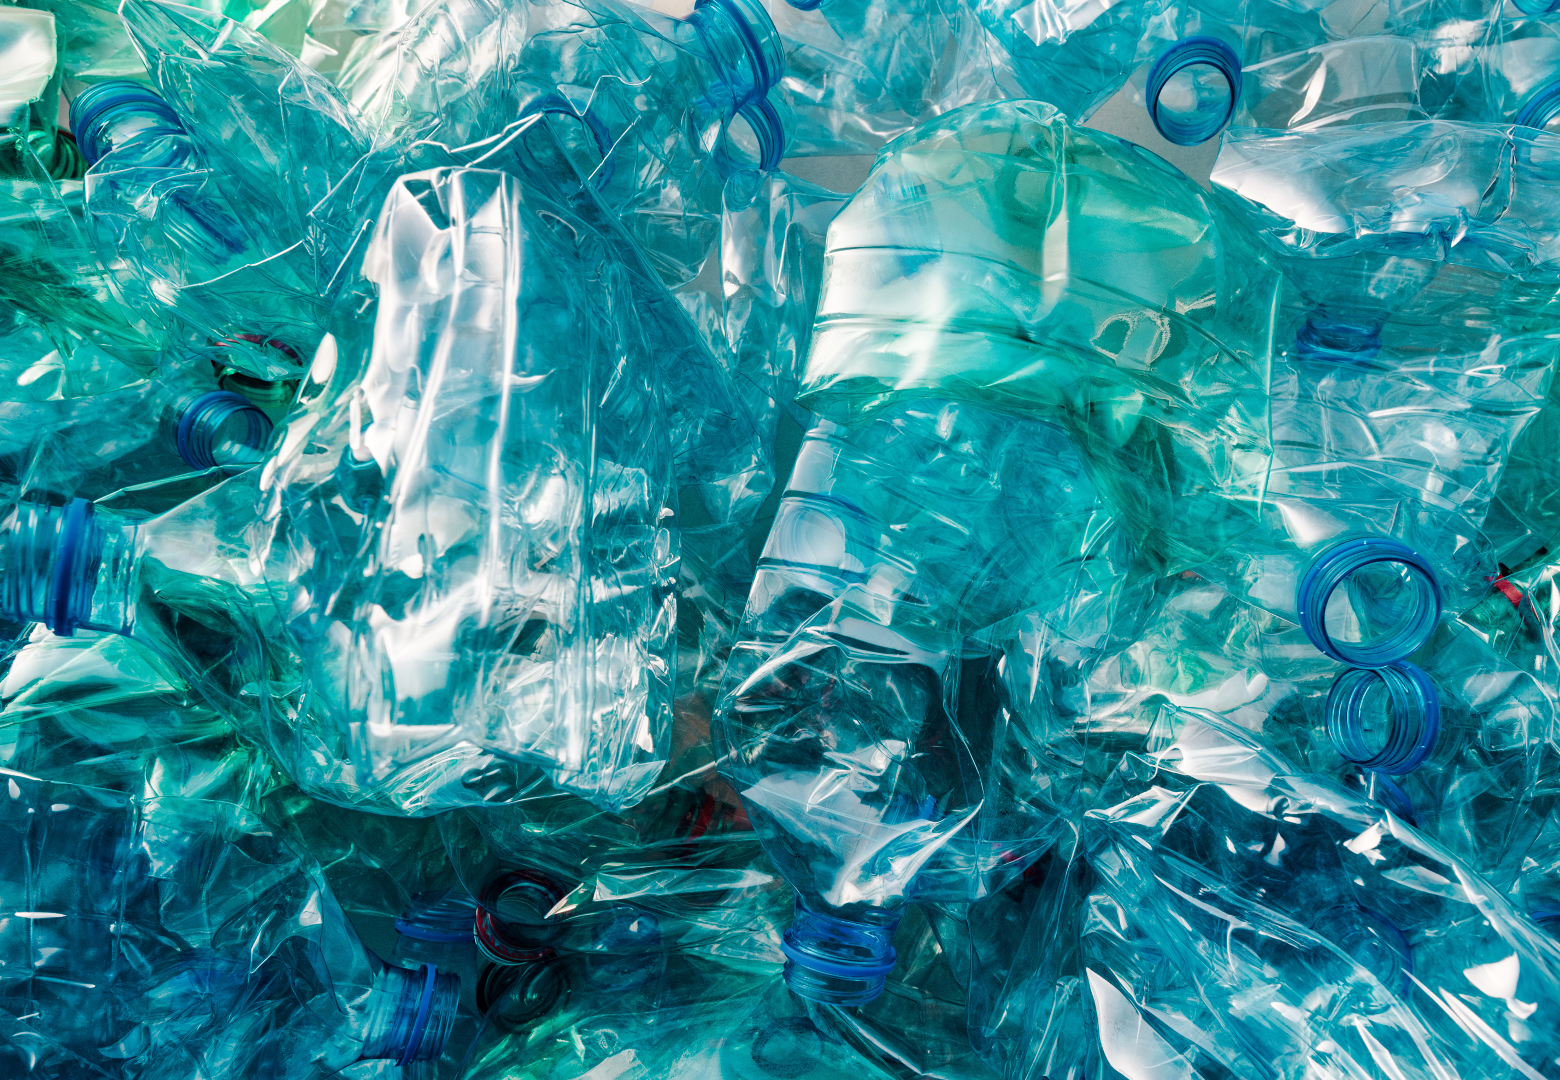 ENZYME INNOVATION TO FIGHT PLASTIC POLLUTION